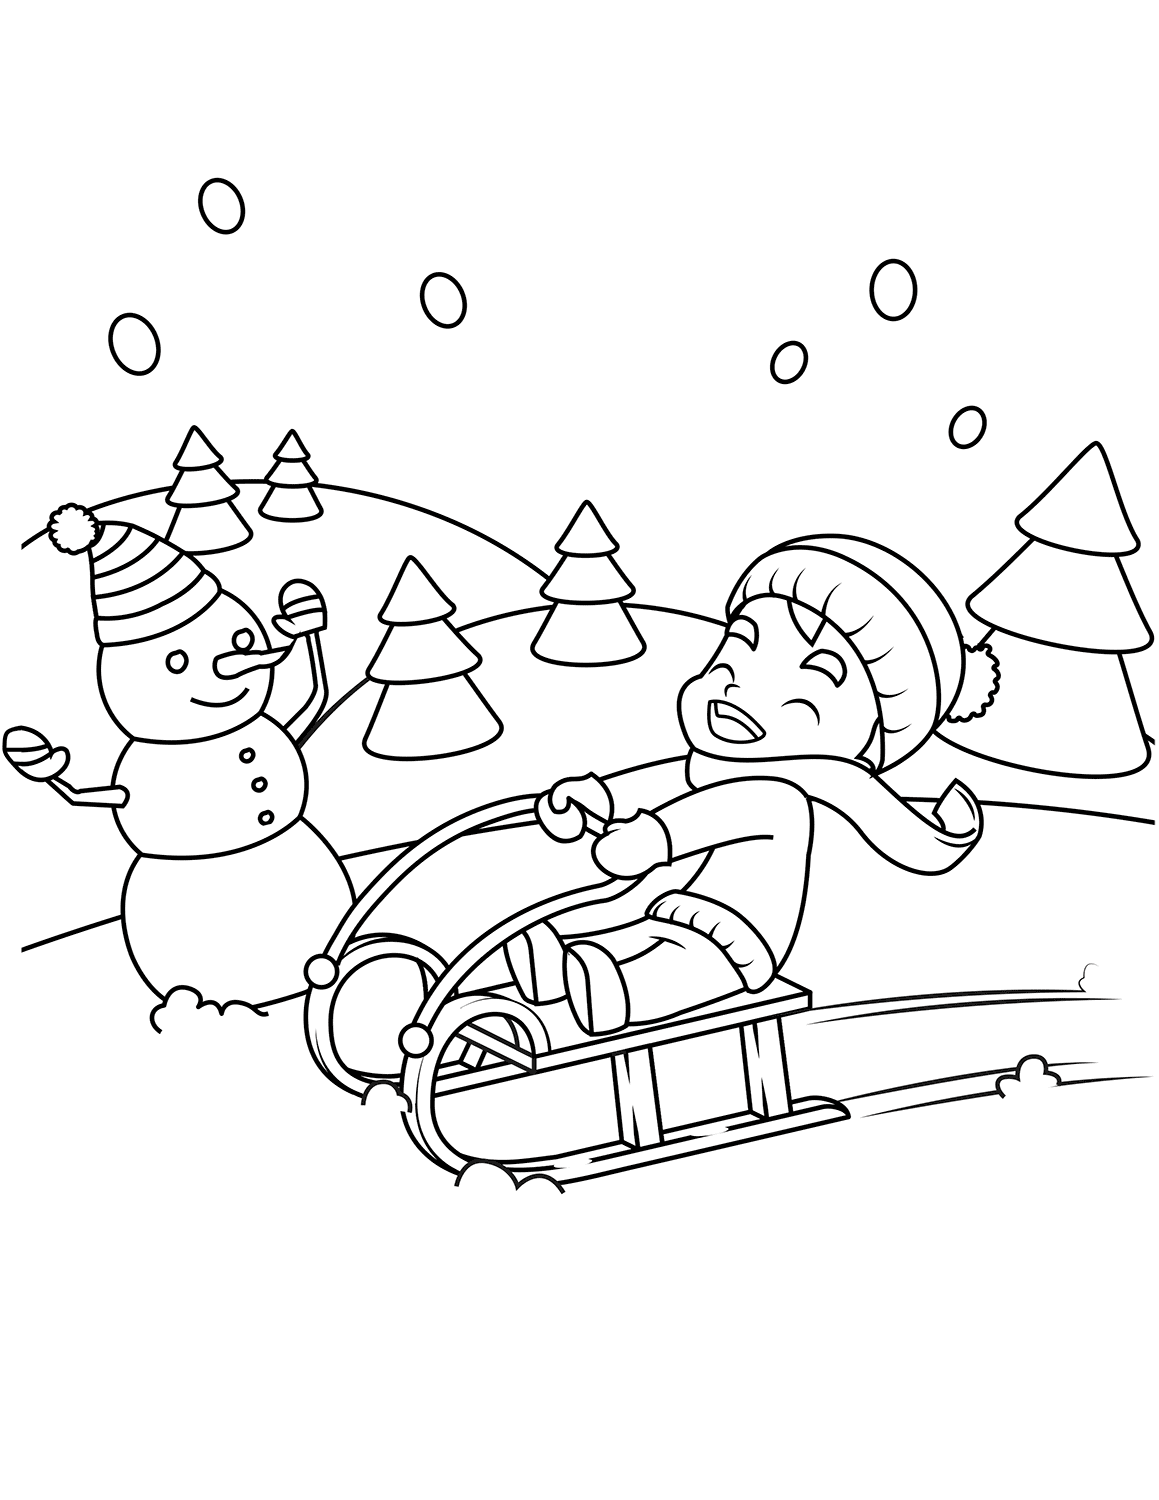 winter scene coloring pages free printable winter coloring pages for kids scene winter coloring pages 